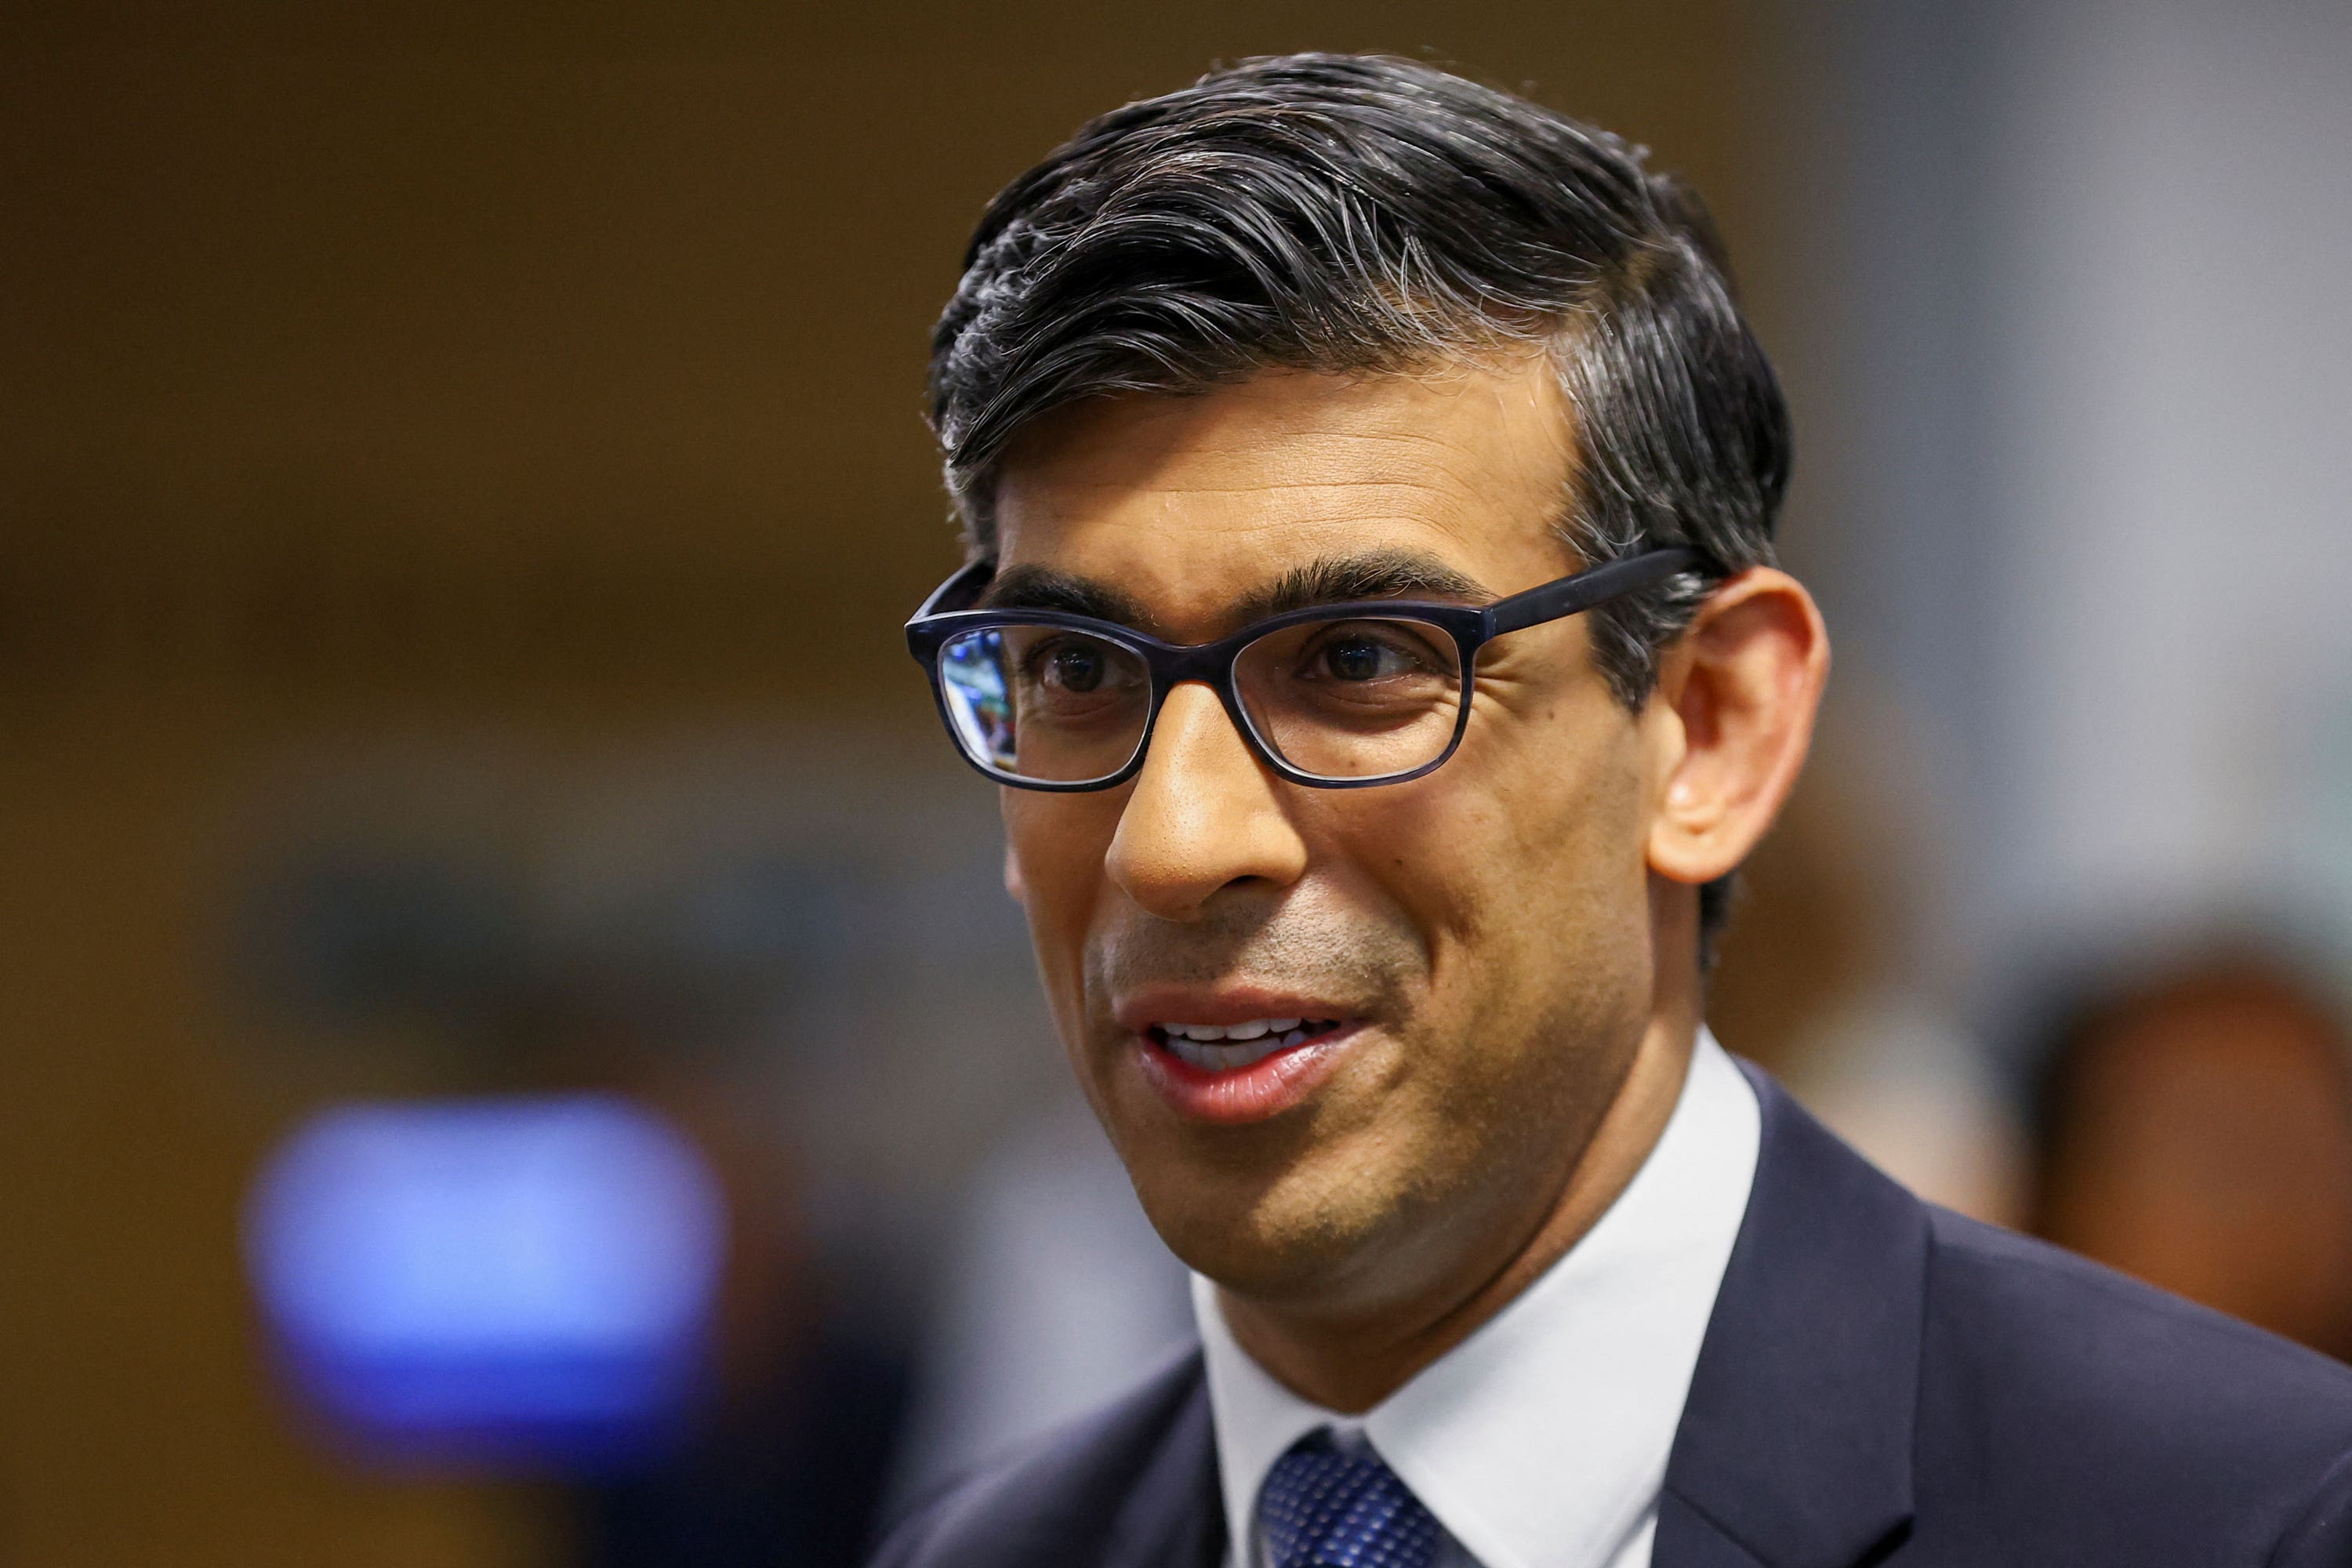 Rishi Sunak, who was chancellor during two years of the Covid pandemic